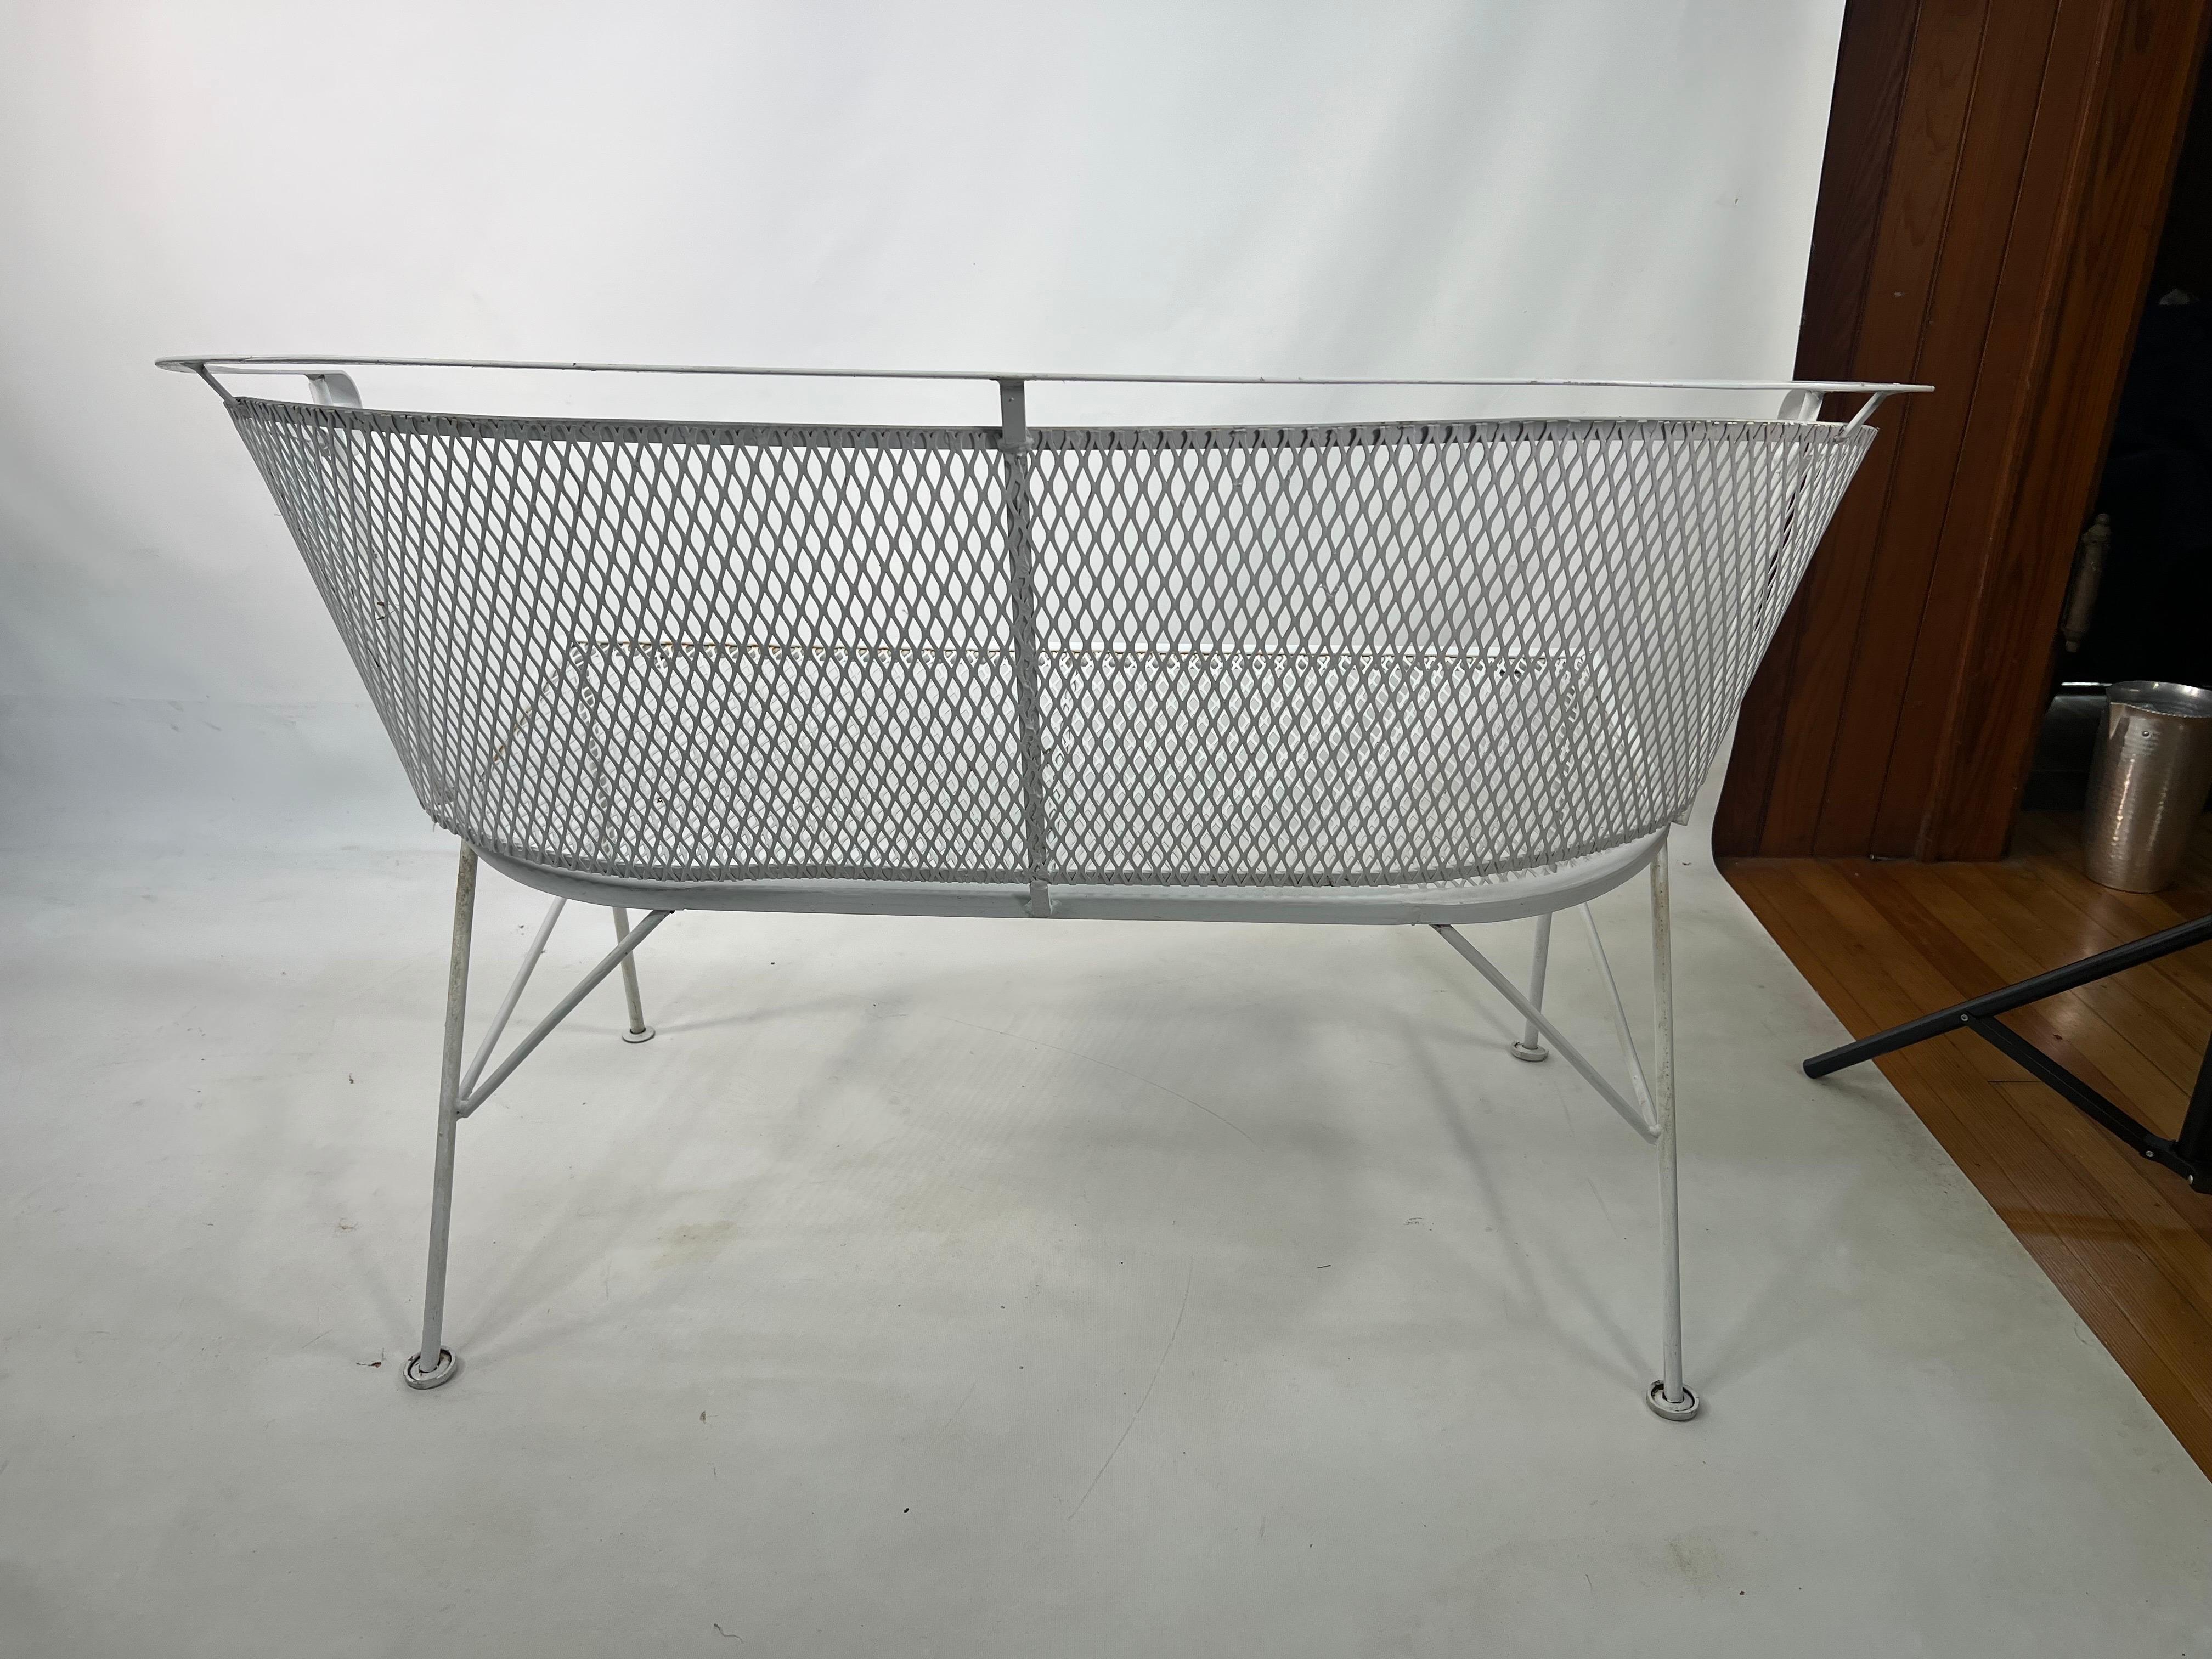 1960s Salterini Style Wrought Iron Garden Patio Settee In Good Condition For Sale In Esperance, NY